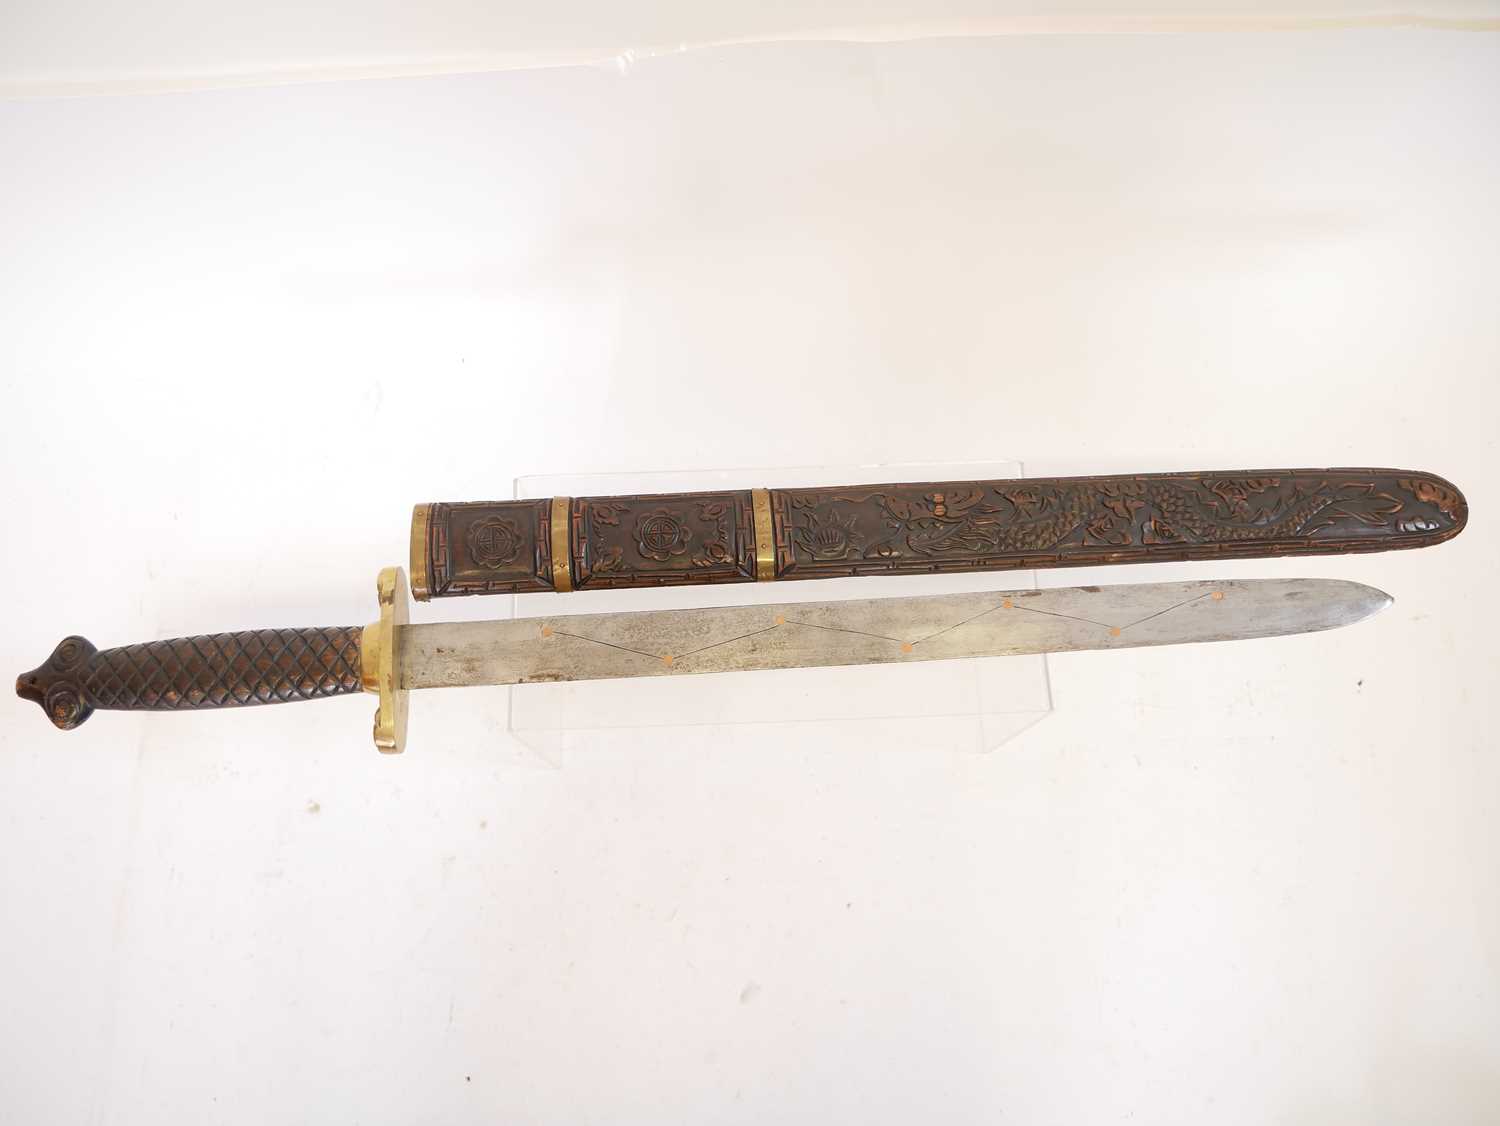 Chinese double edged sword, with copper studded blade, brass guard and carved grip and scabbard. - Image 6 of 7